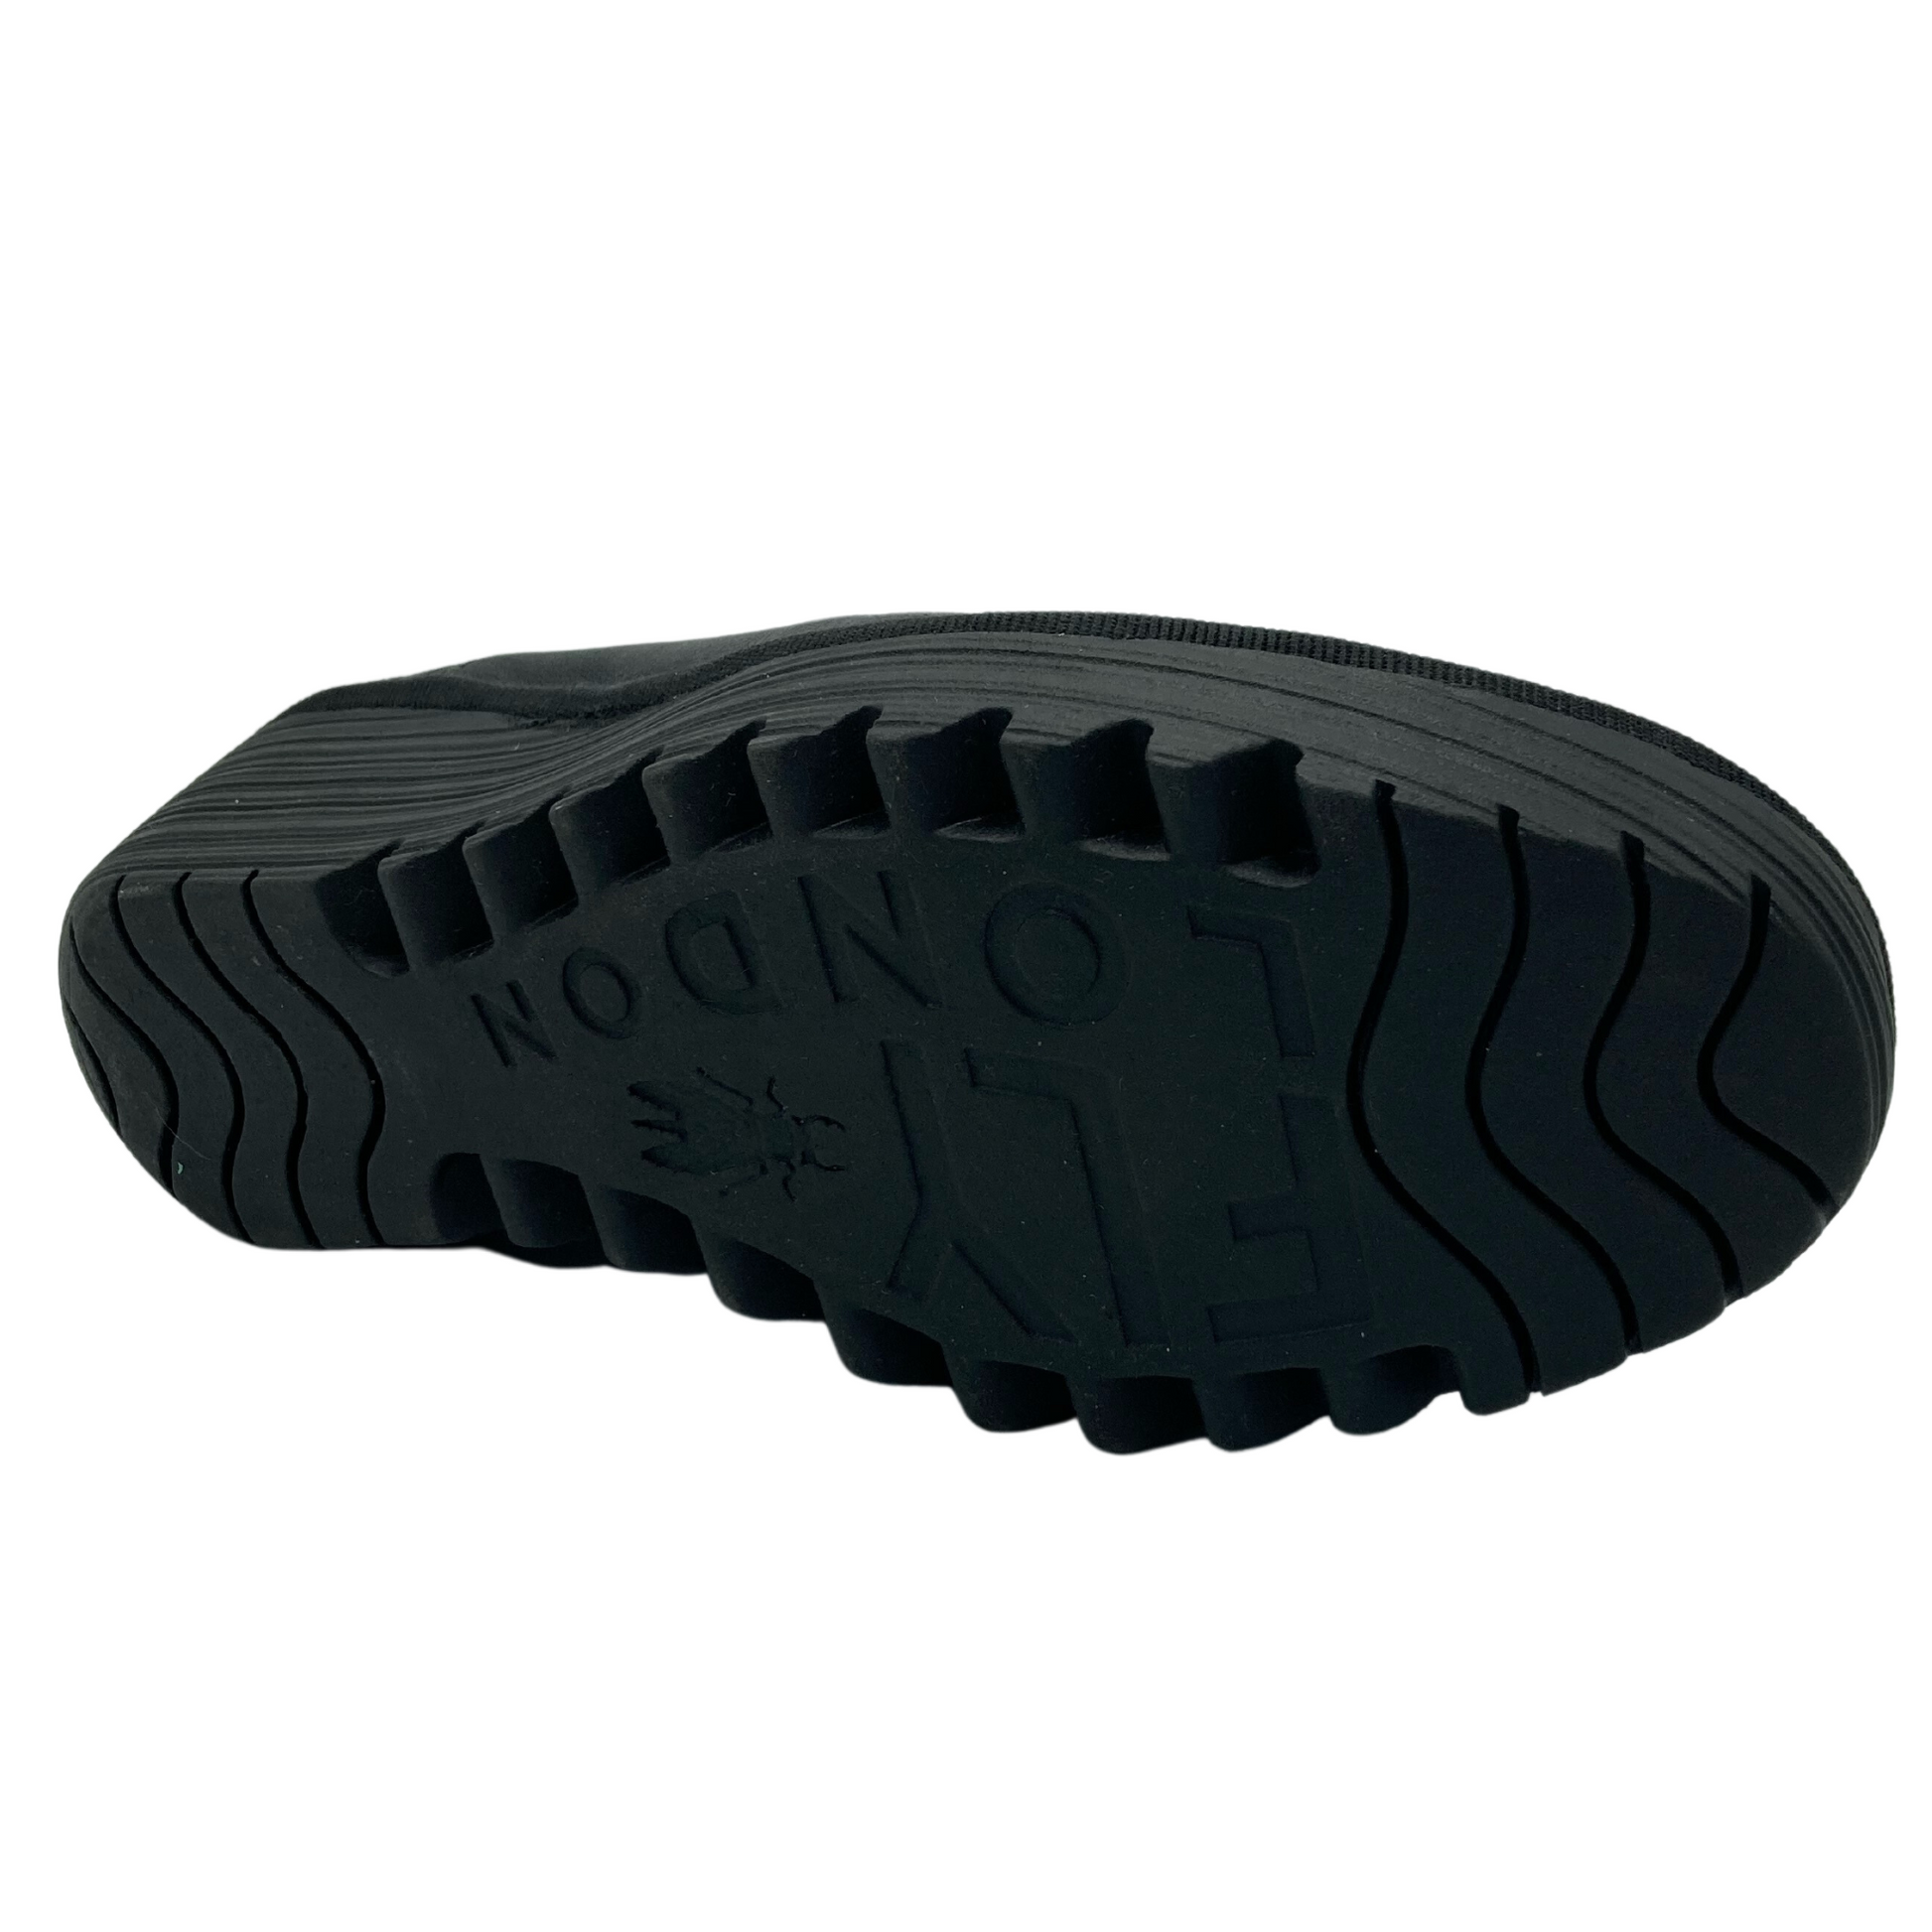 View of the bottom of the wedge shoe with black rubber tread